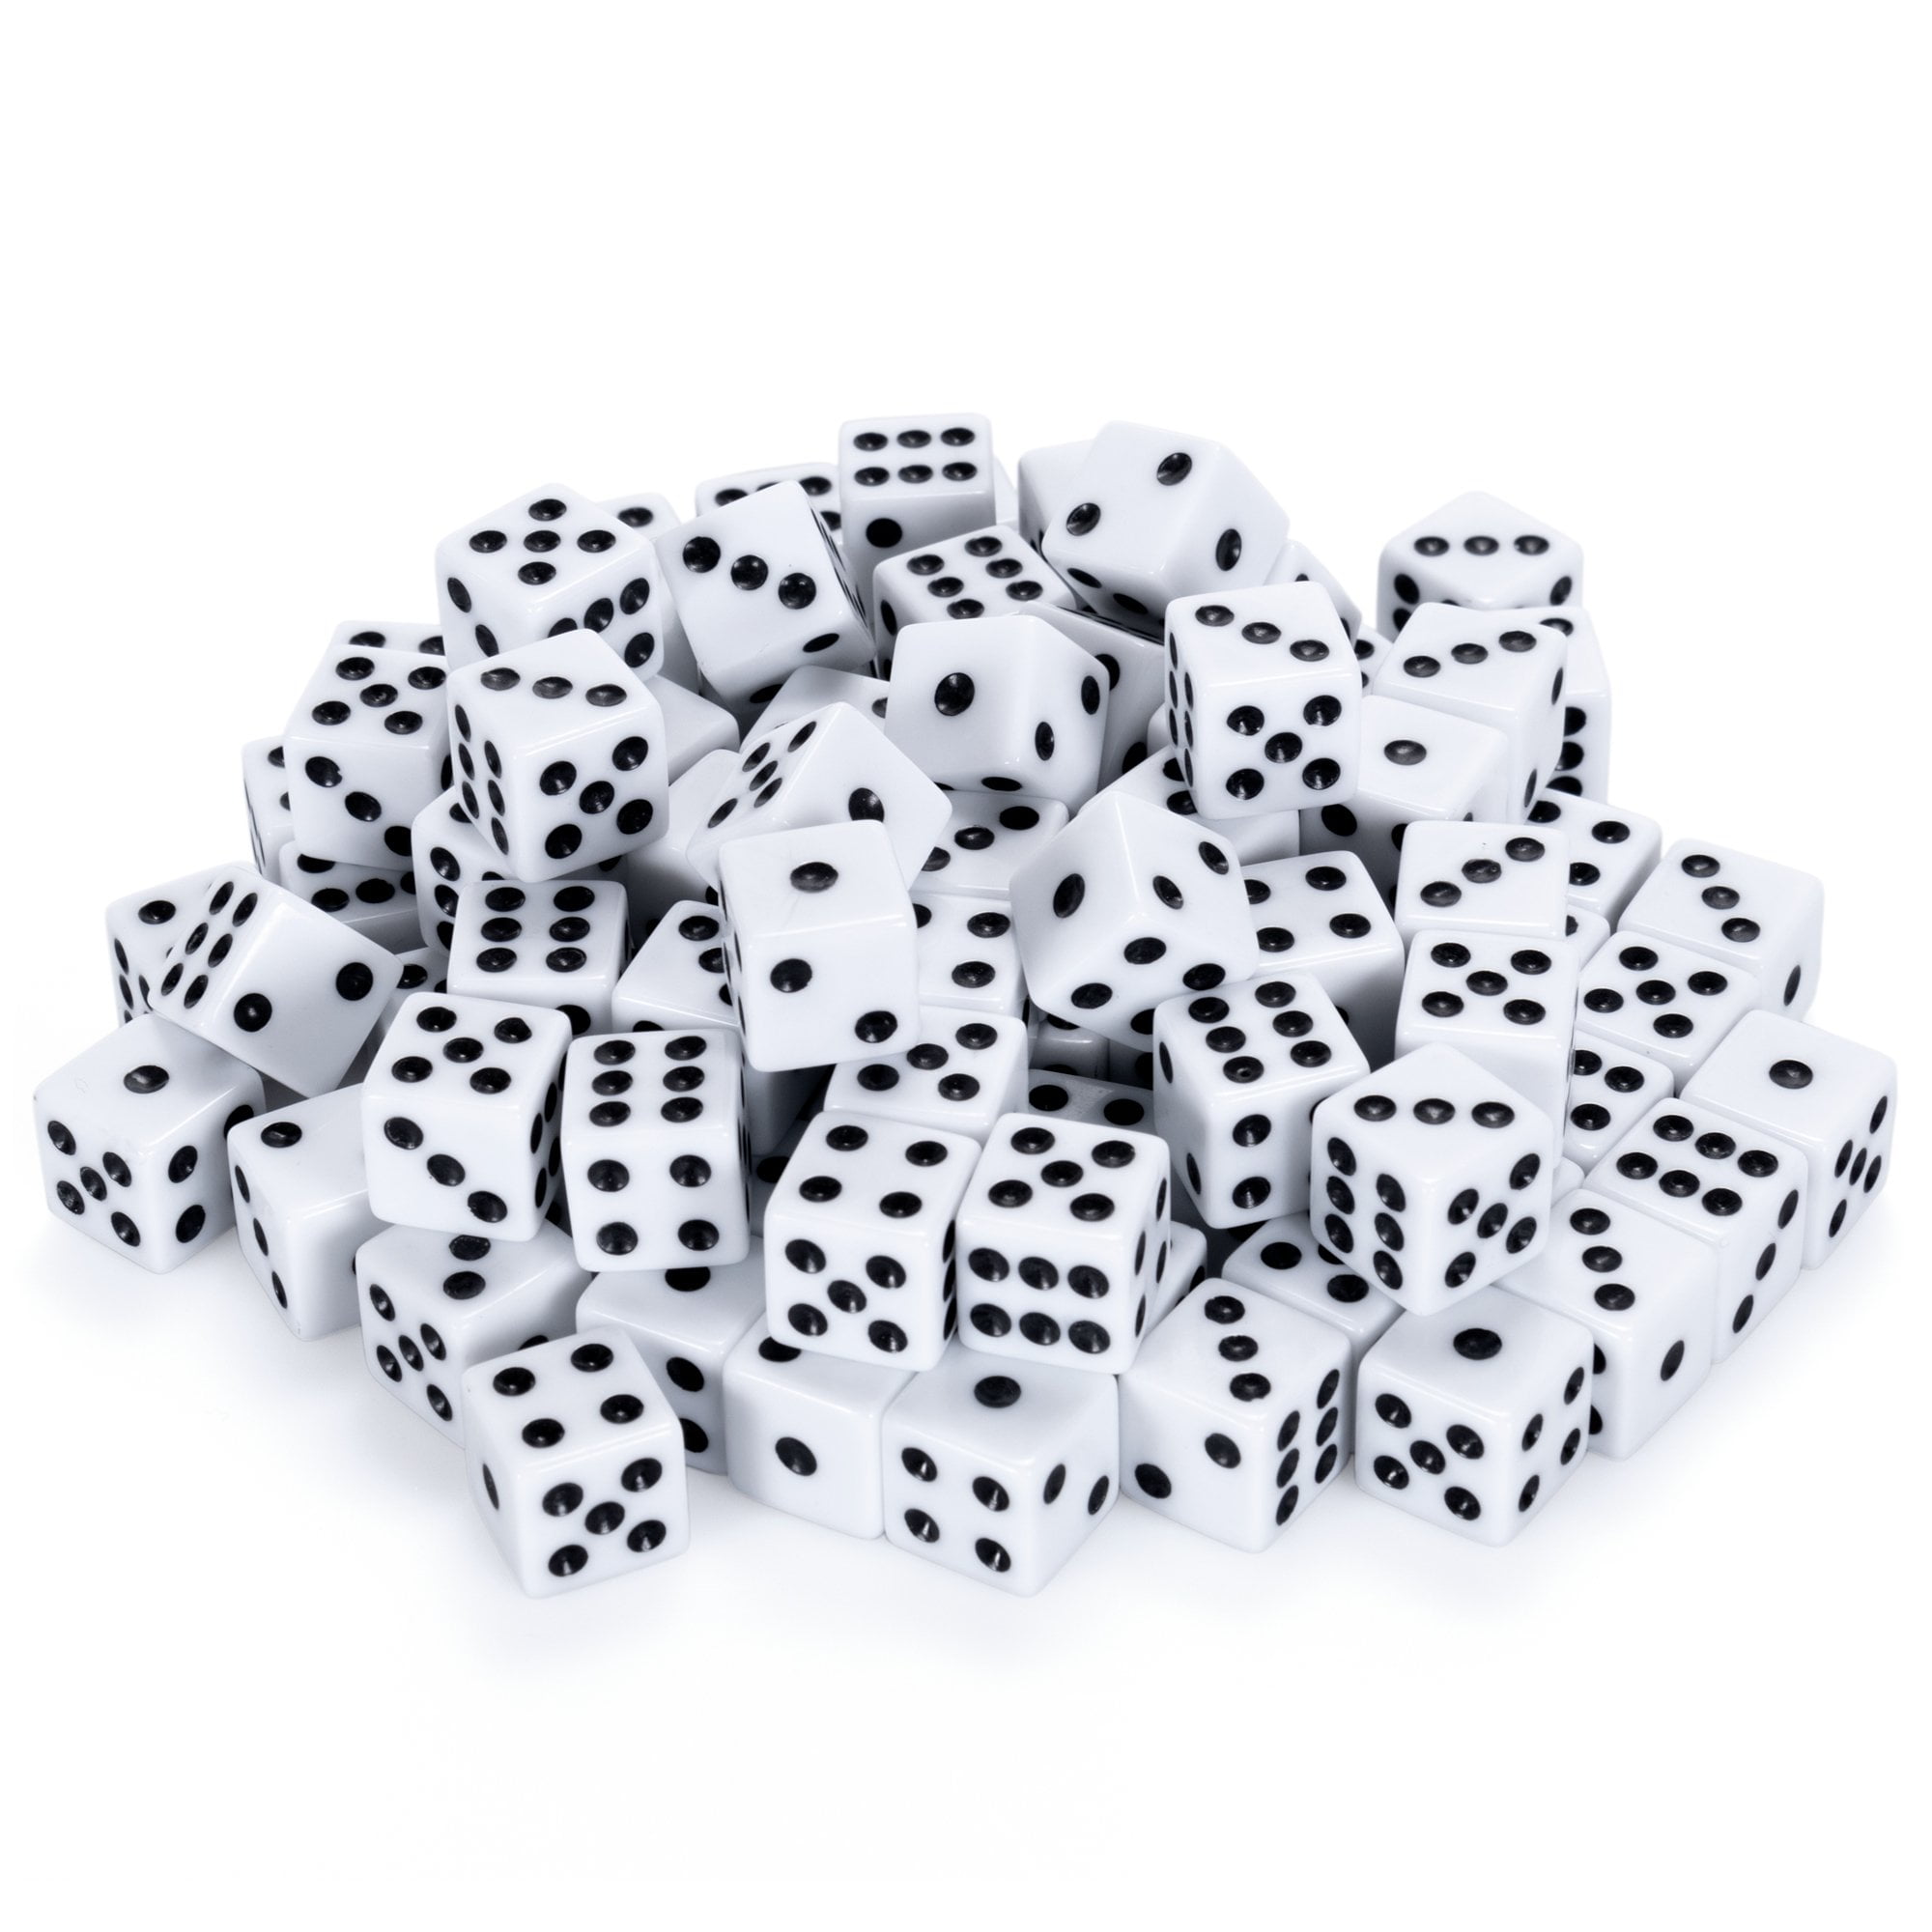 16MM Blank White Dice Set Acrylic Rounded D6 Dice Cubes for Game, Party,  Fun, DIY Sticker and Math Teaching, Pack of 50